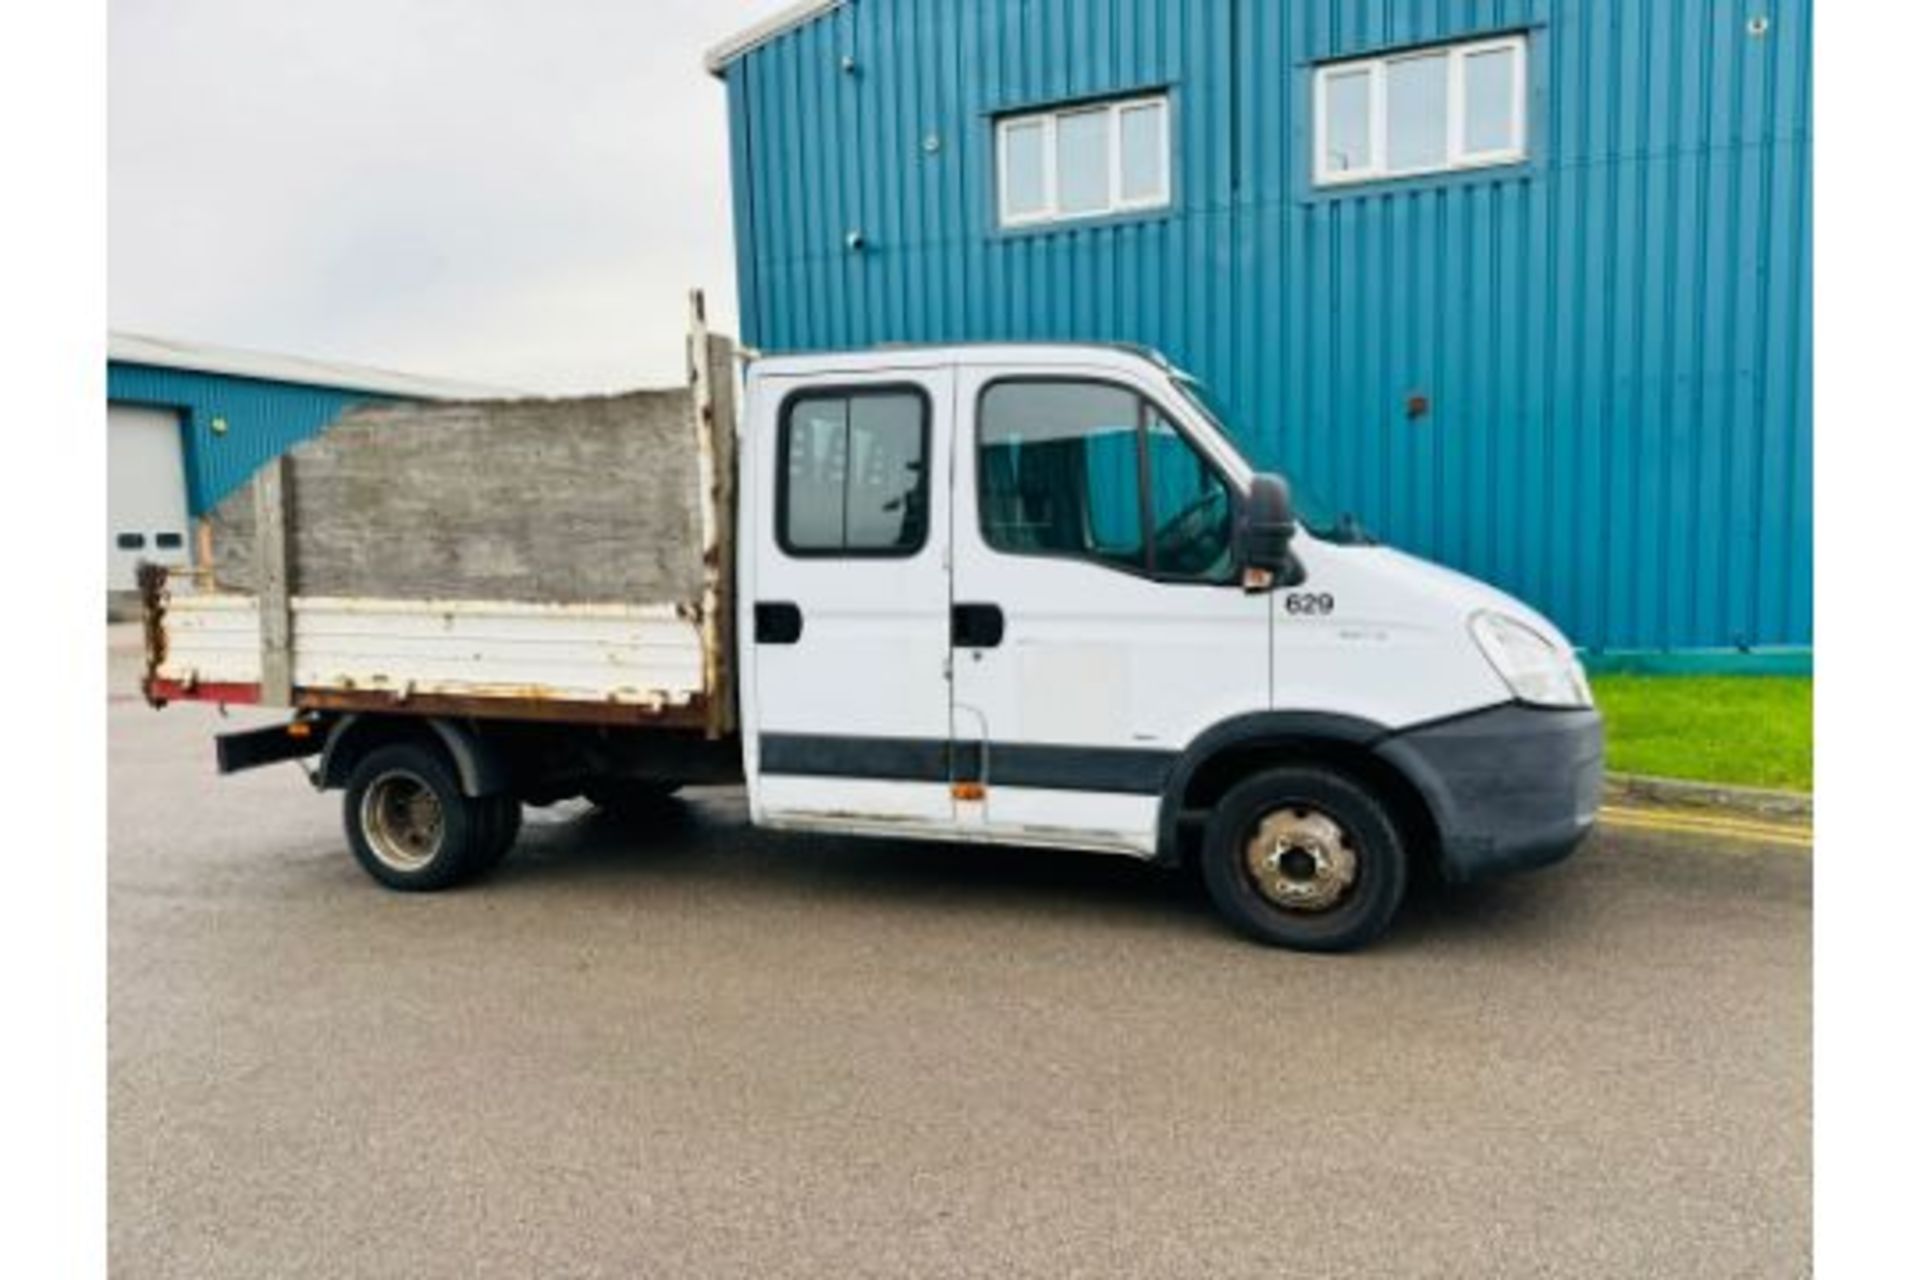 (RESERVE MET)Iveco Daily 2.3 TD 35C13 Double Cab Tipper - 2009 09 Reg - TRW - 7 Seater - 98k - Image 5 of 18